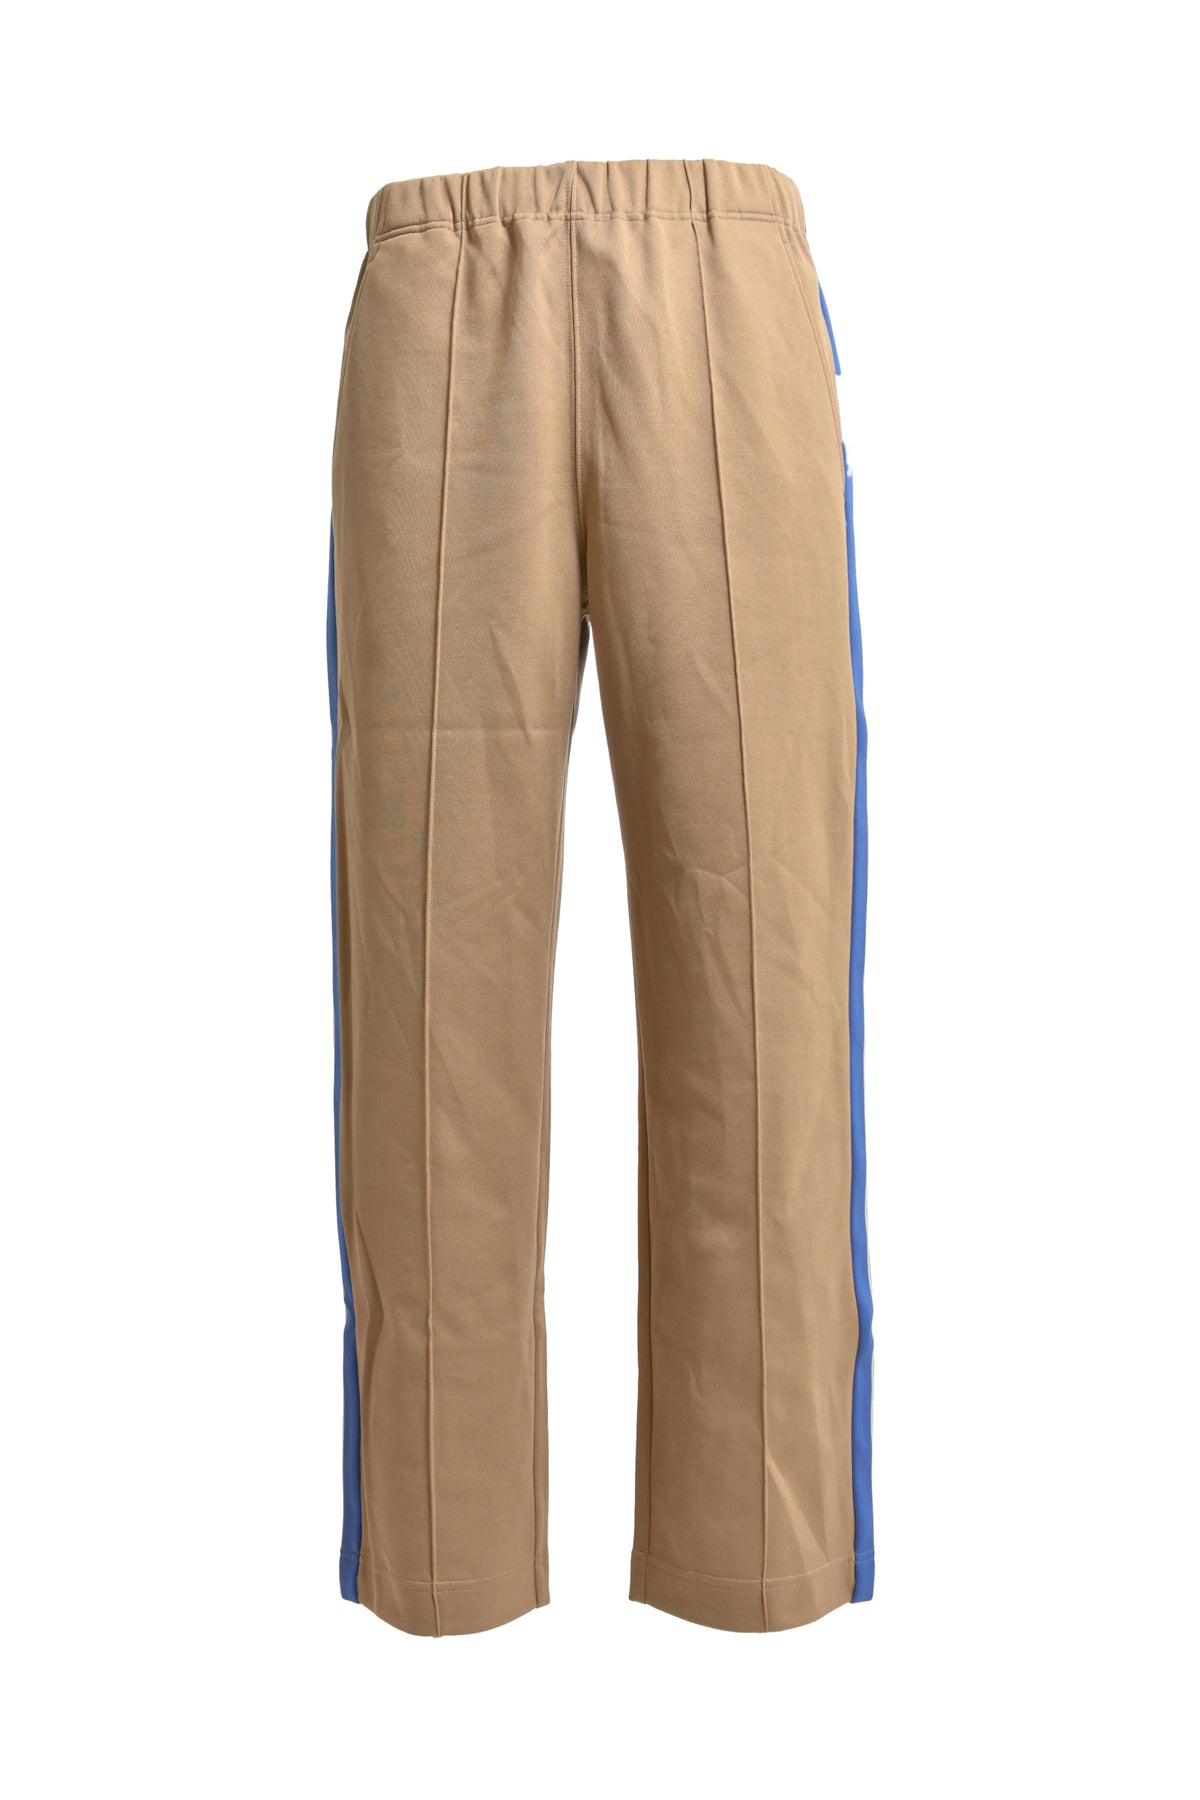 MONCLER TROUSERS / BRW 248